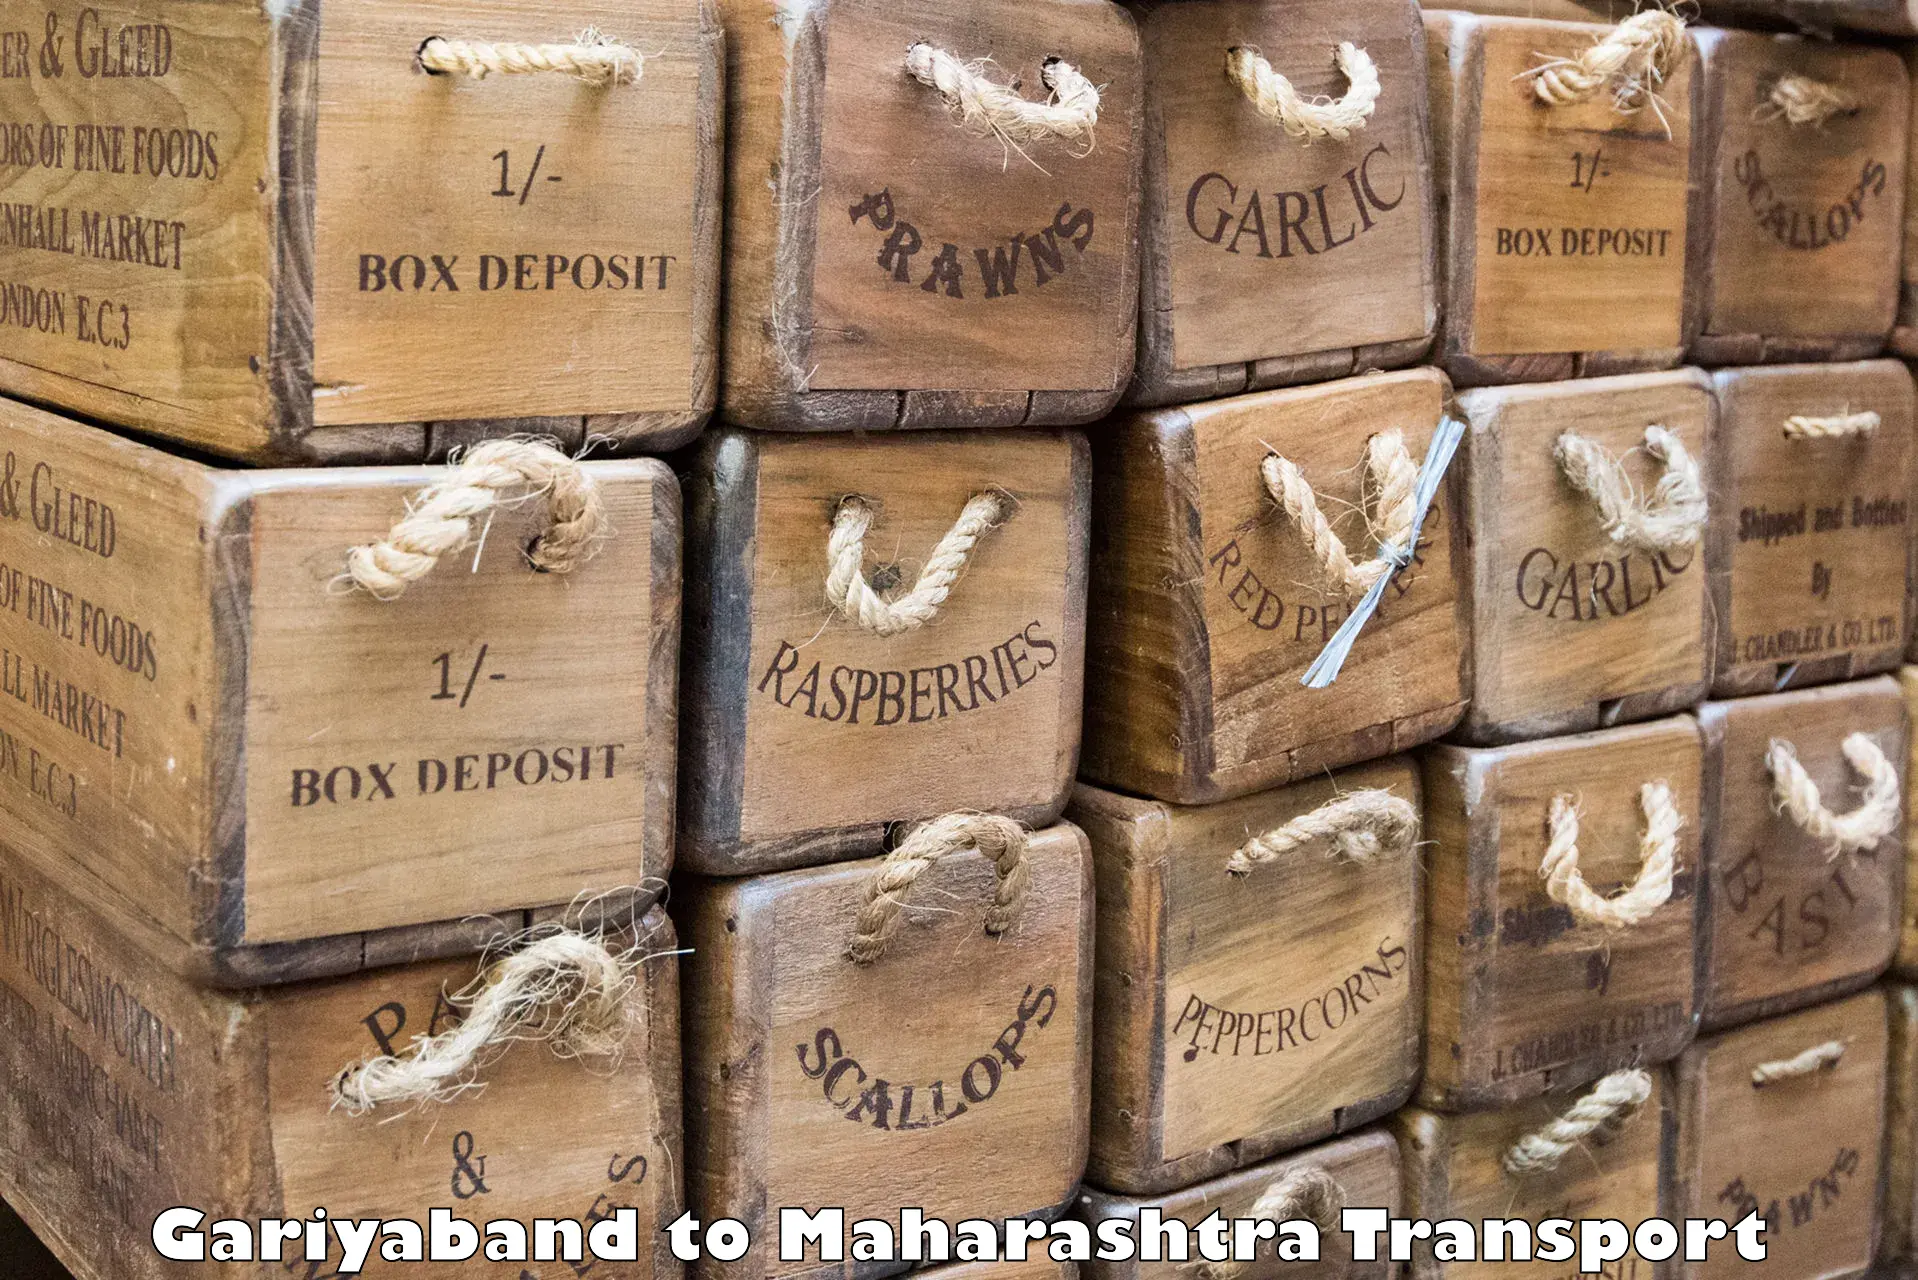 Container transport service Gariyaband to Bhoom